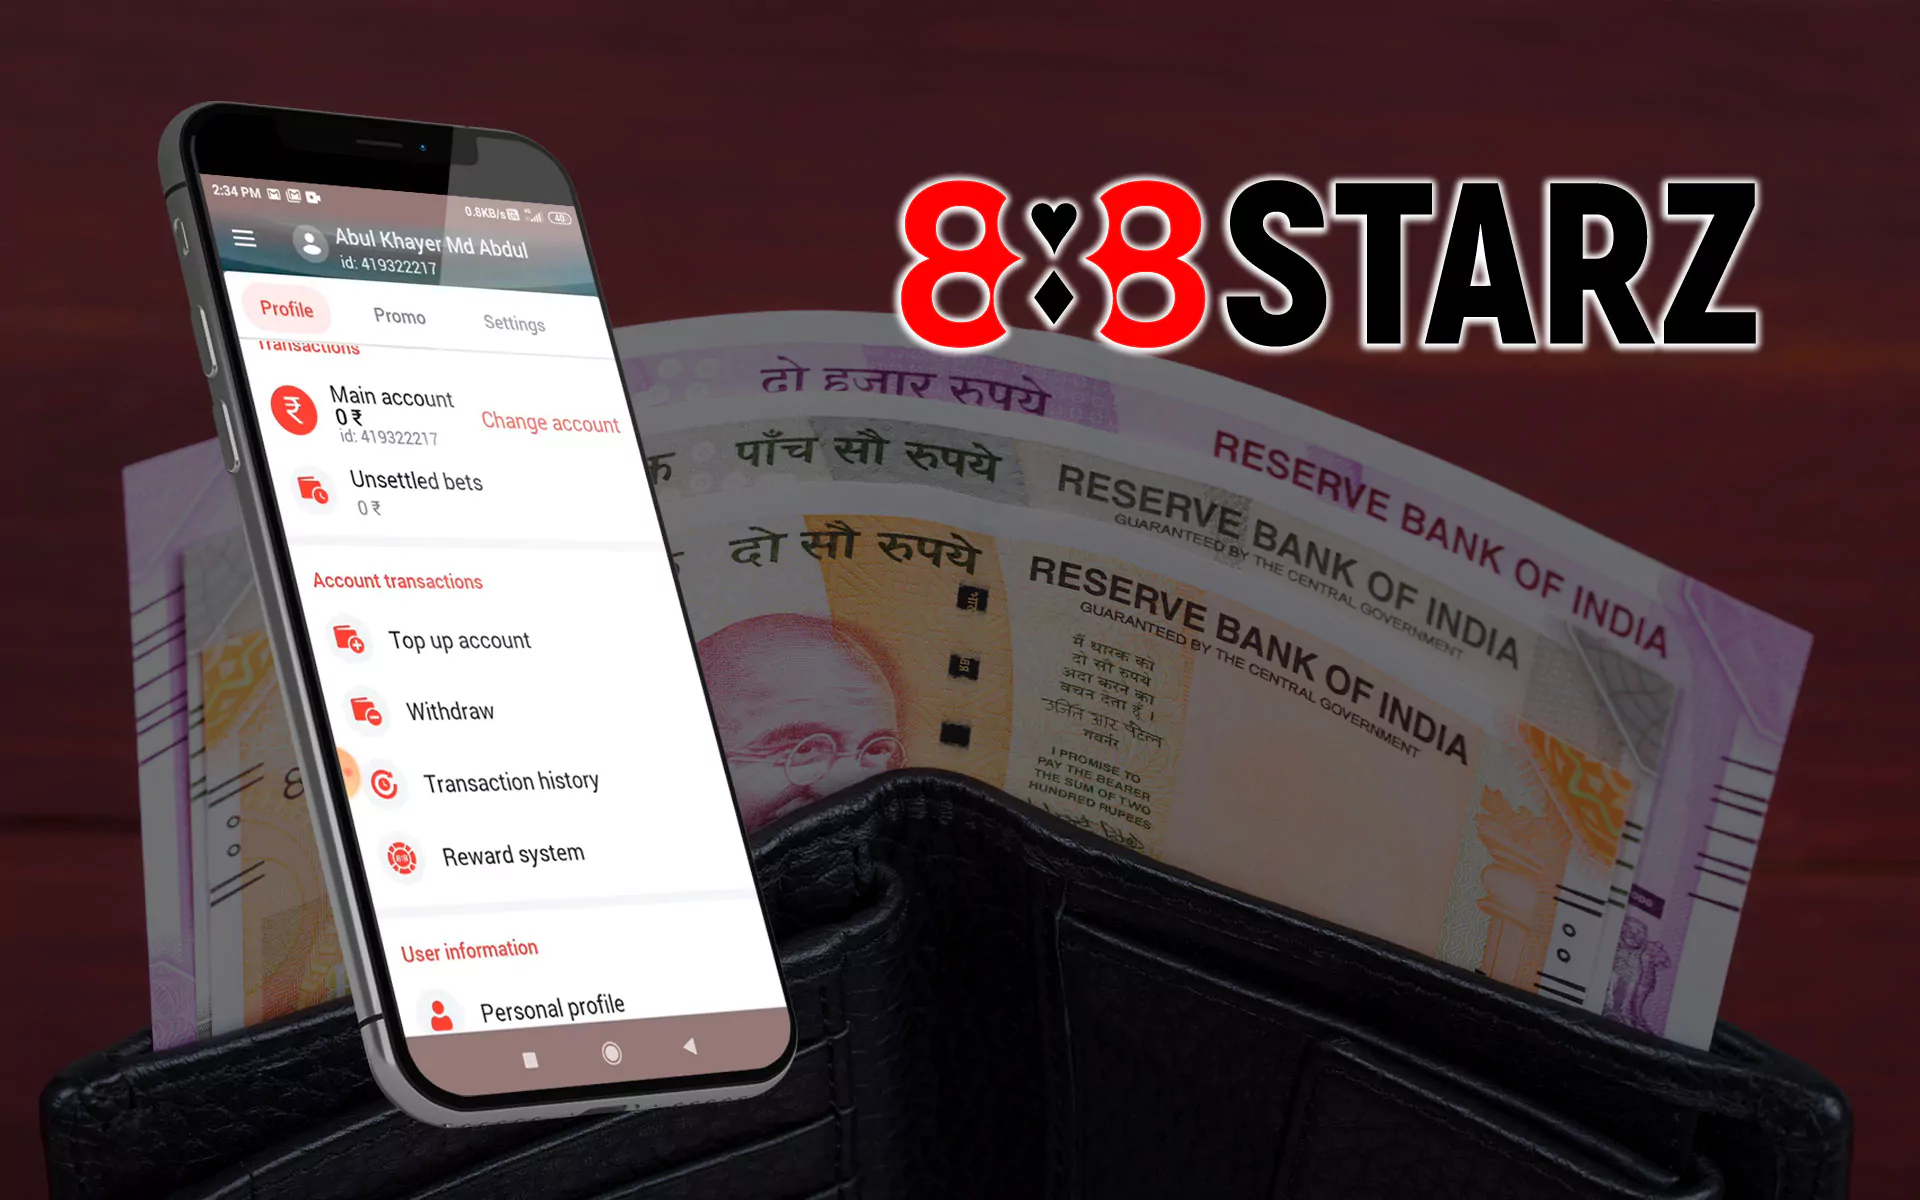 Go to the withdrawal section on the 888starz website.